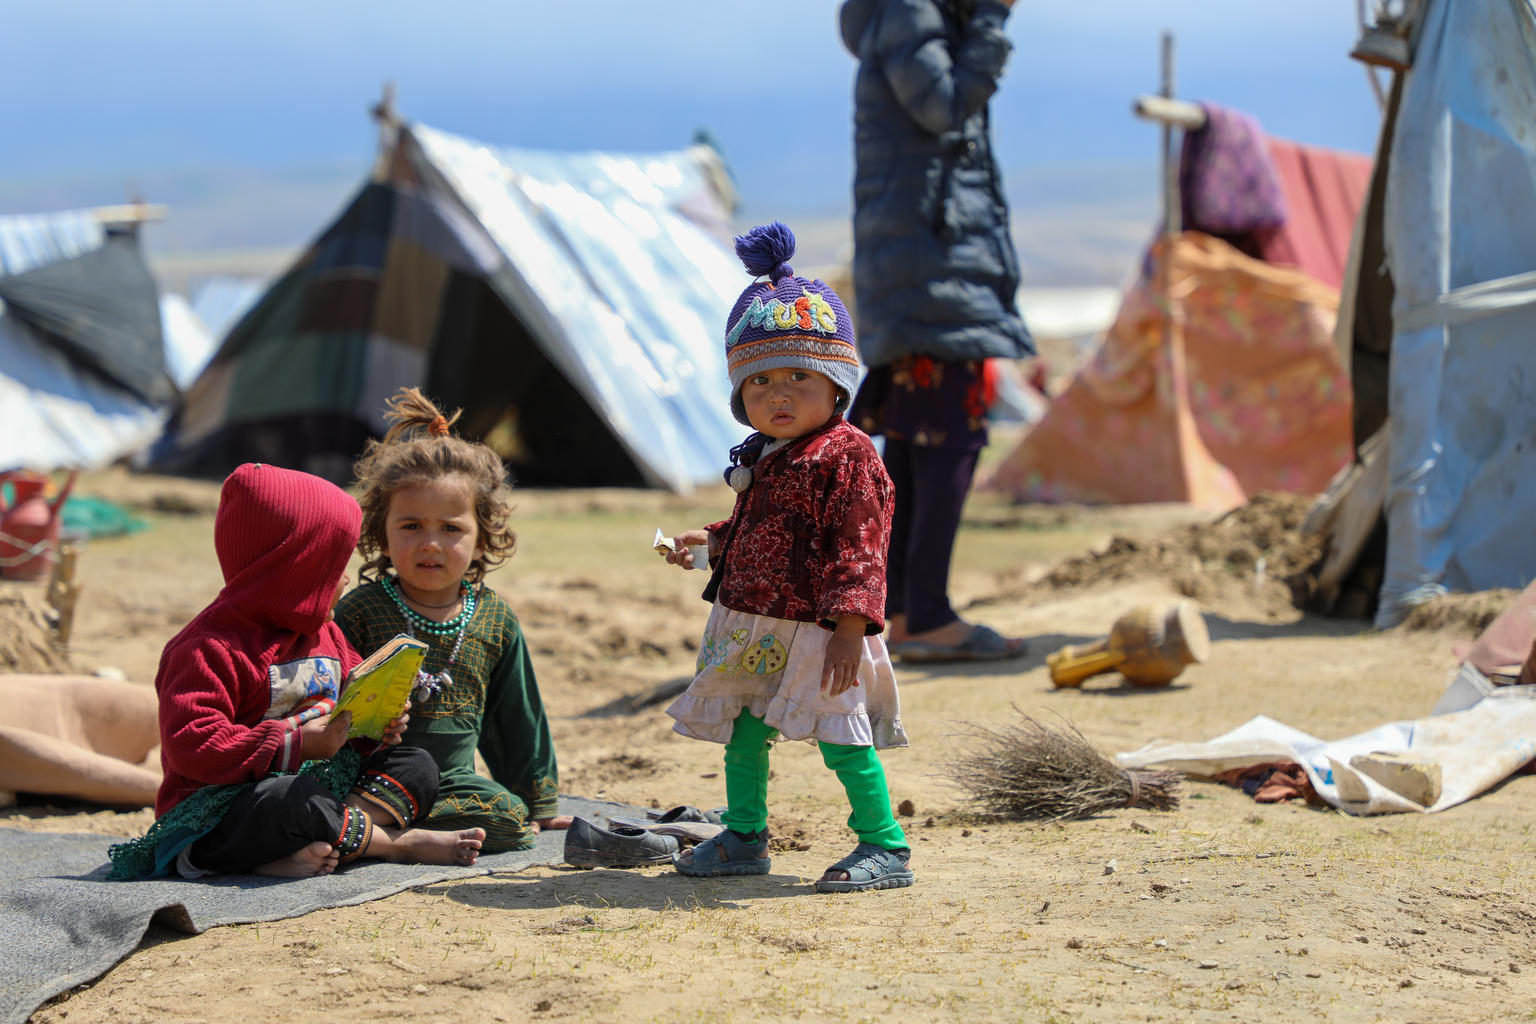 3 kids (2-3 years old) wearing winter cloth in a camp setting.